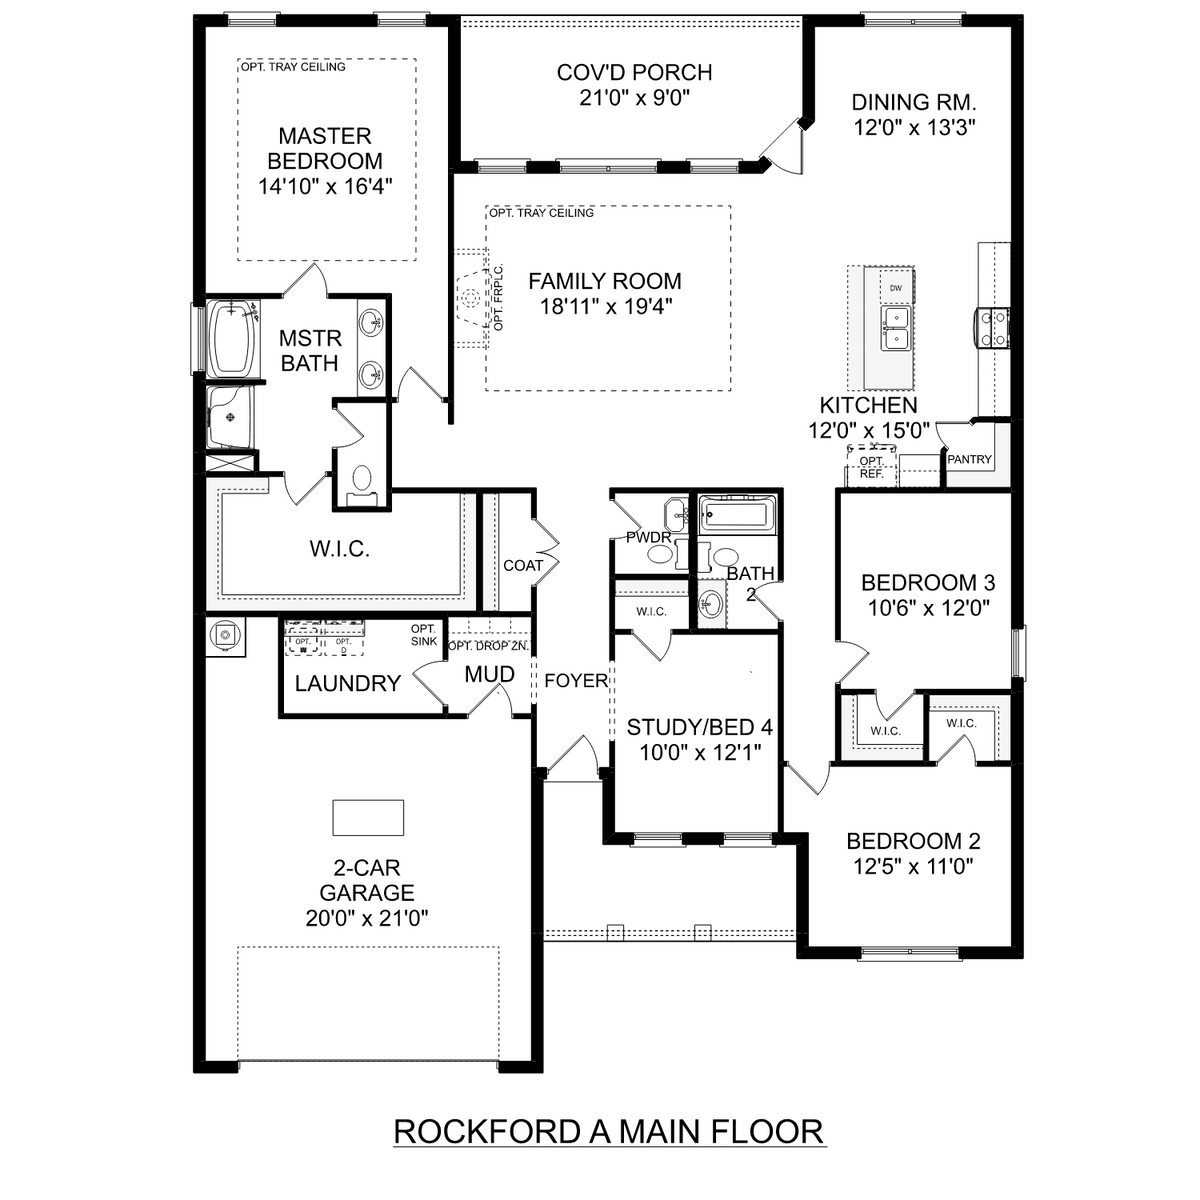 1 - The Rockford floor plan layout for 223 White Horse Way in Davidson Homes' Kendall Downs community.